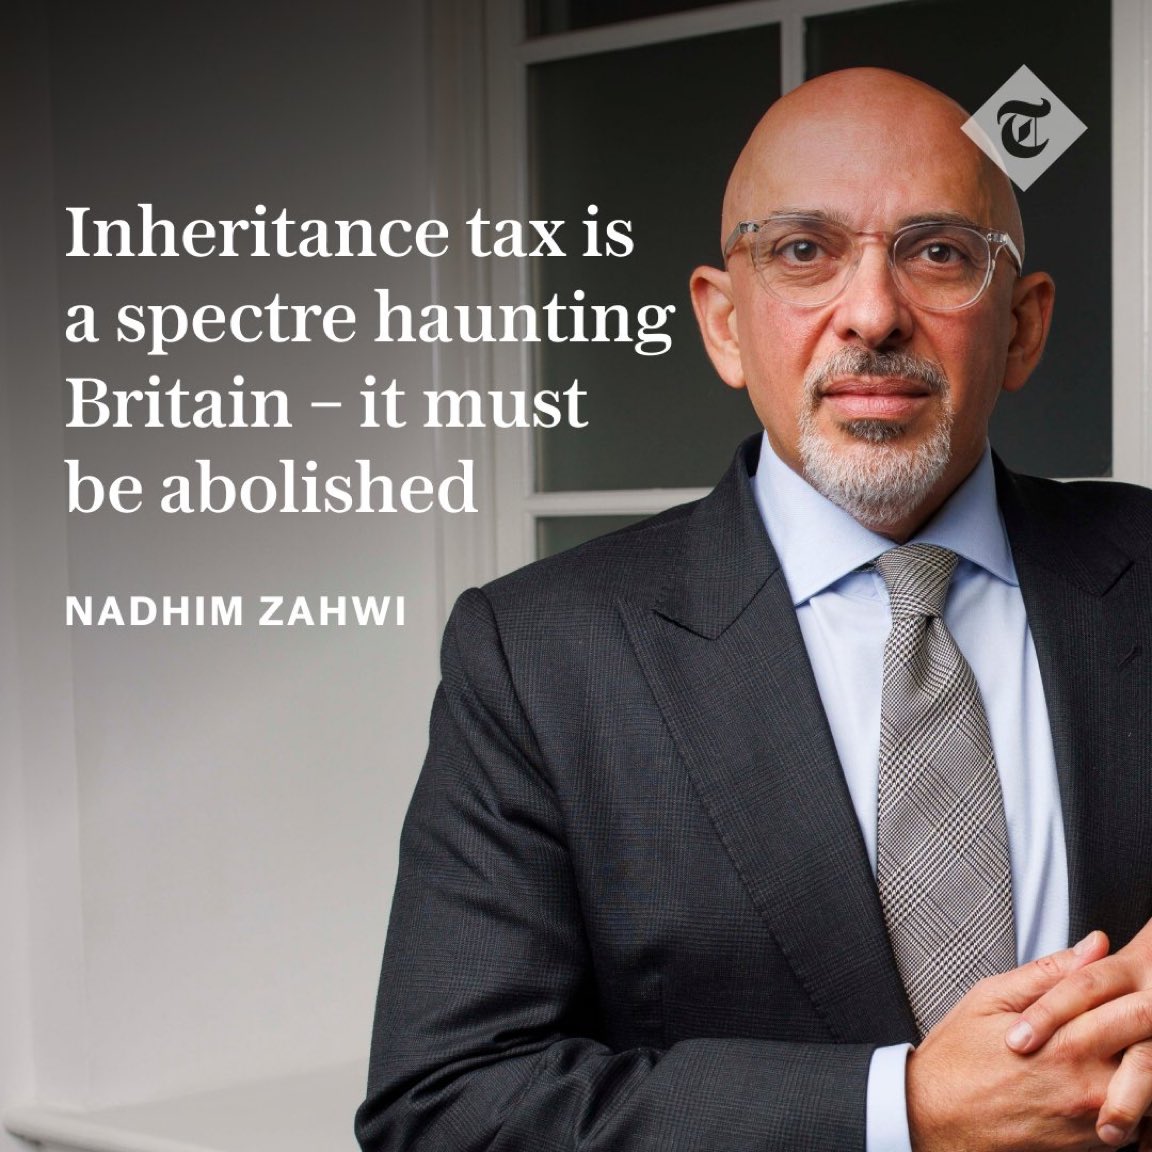 Have I got this right?

Nadhim Zahawi was sacked for failing to disclose he was being investigated by HMRC for tax dodging.

Now he wants to change the rules to make it easier to dodge inheritance tax?

Couldn’t make it up?